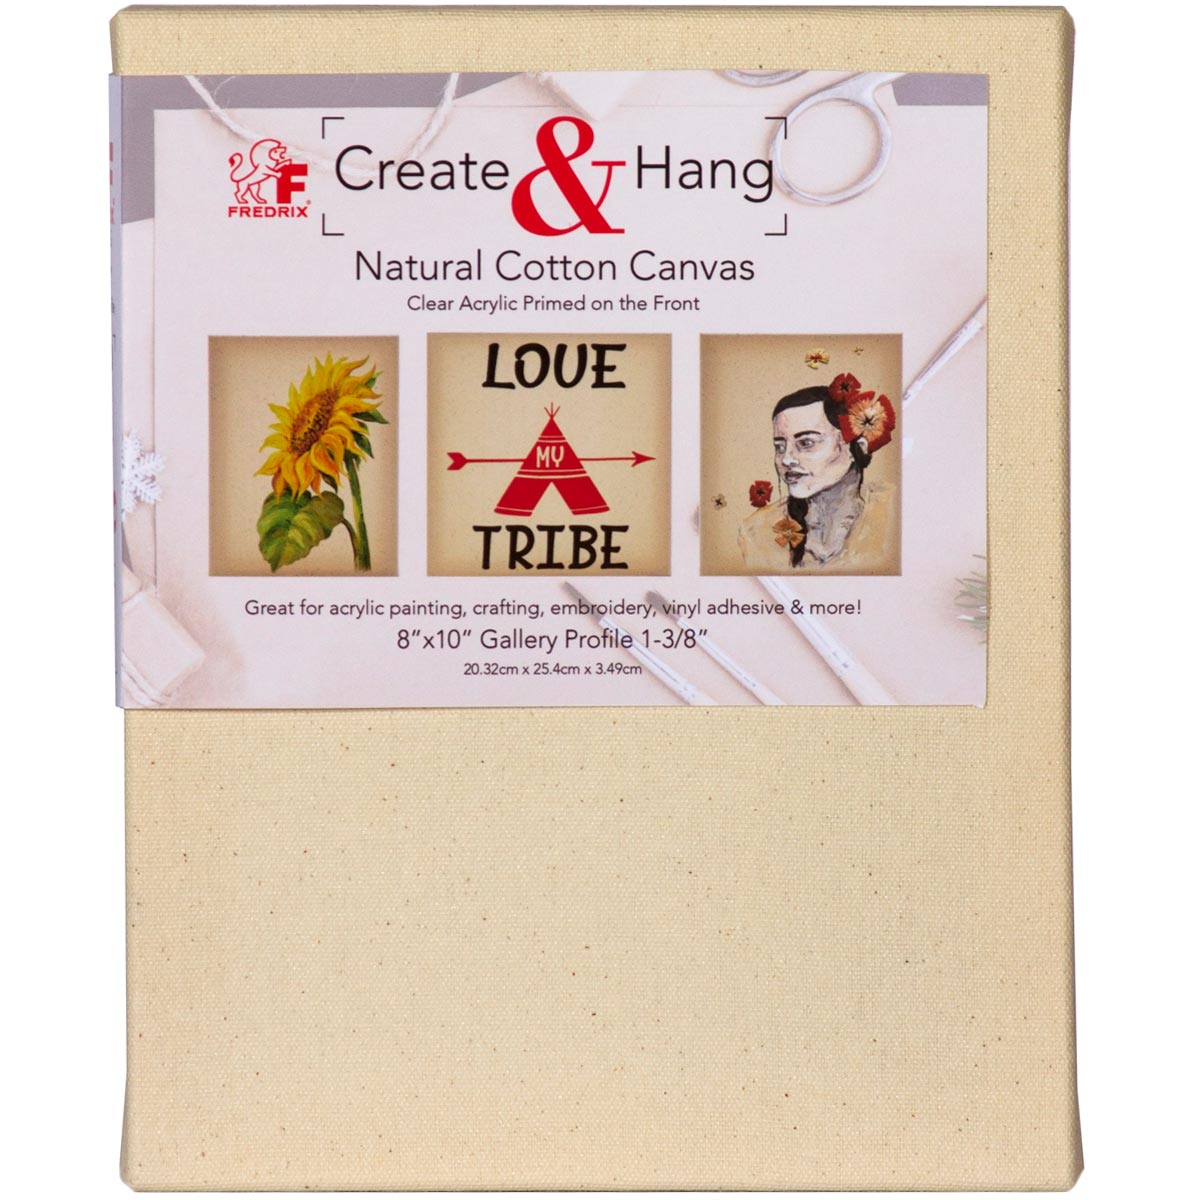 Create & Hang Natural Cotton Canvas, 8oz Primed 8 x 10 inches